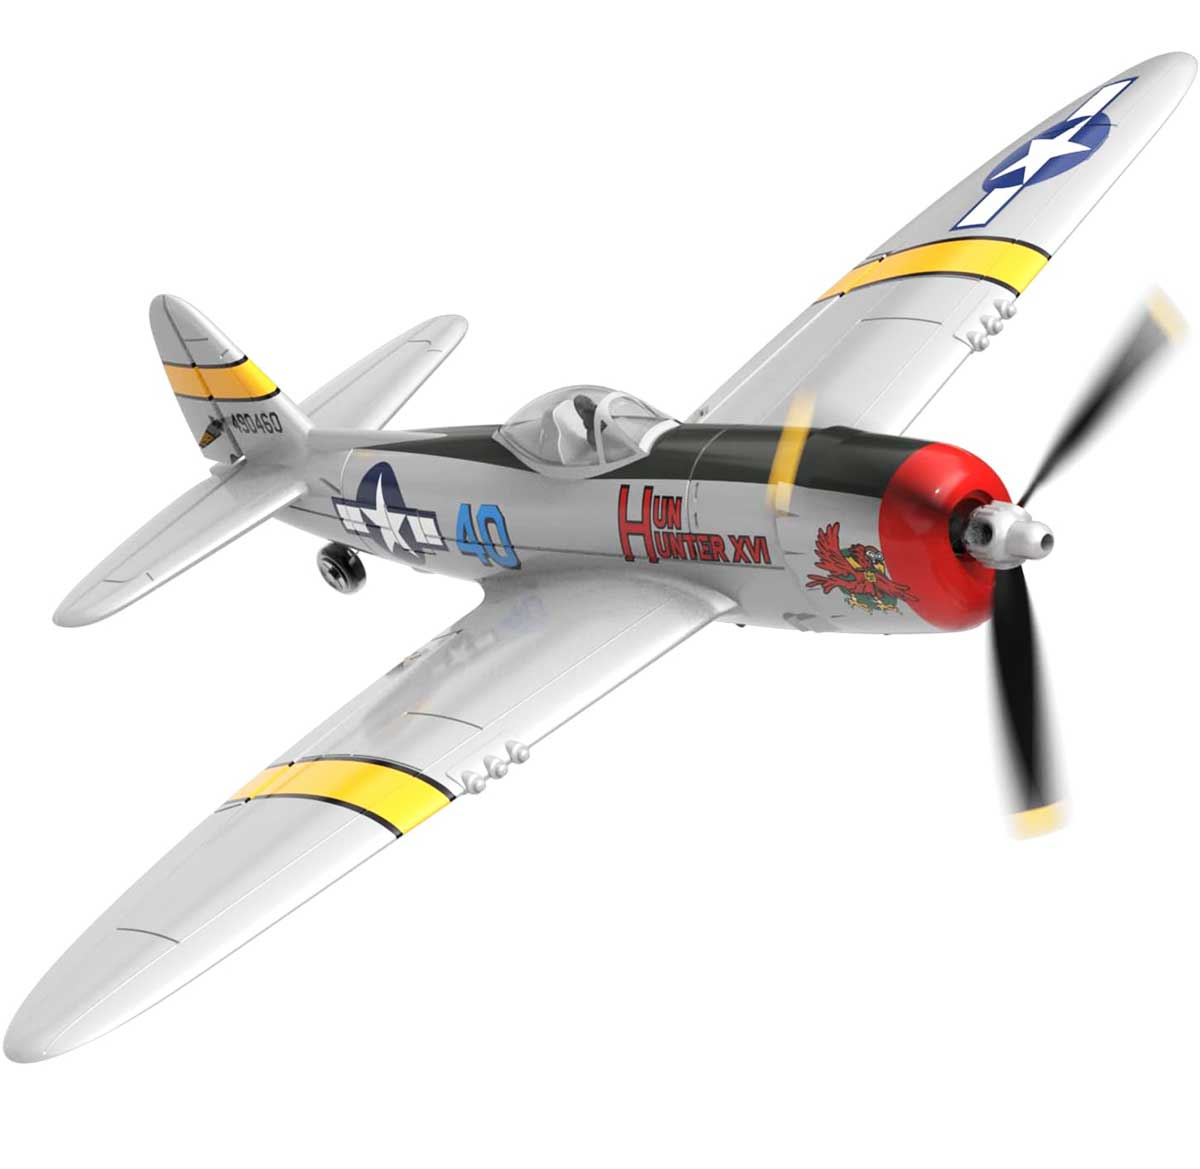 VOLANTEXRC P47 Thunderbolt 4ch Remote Control Airplane for Beginners Xpilot Gyro Stabilizer